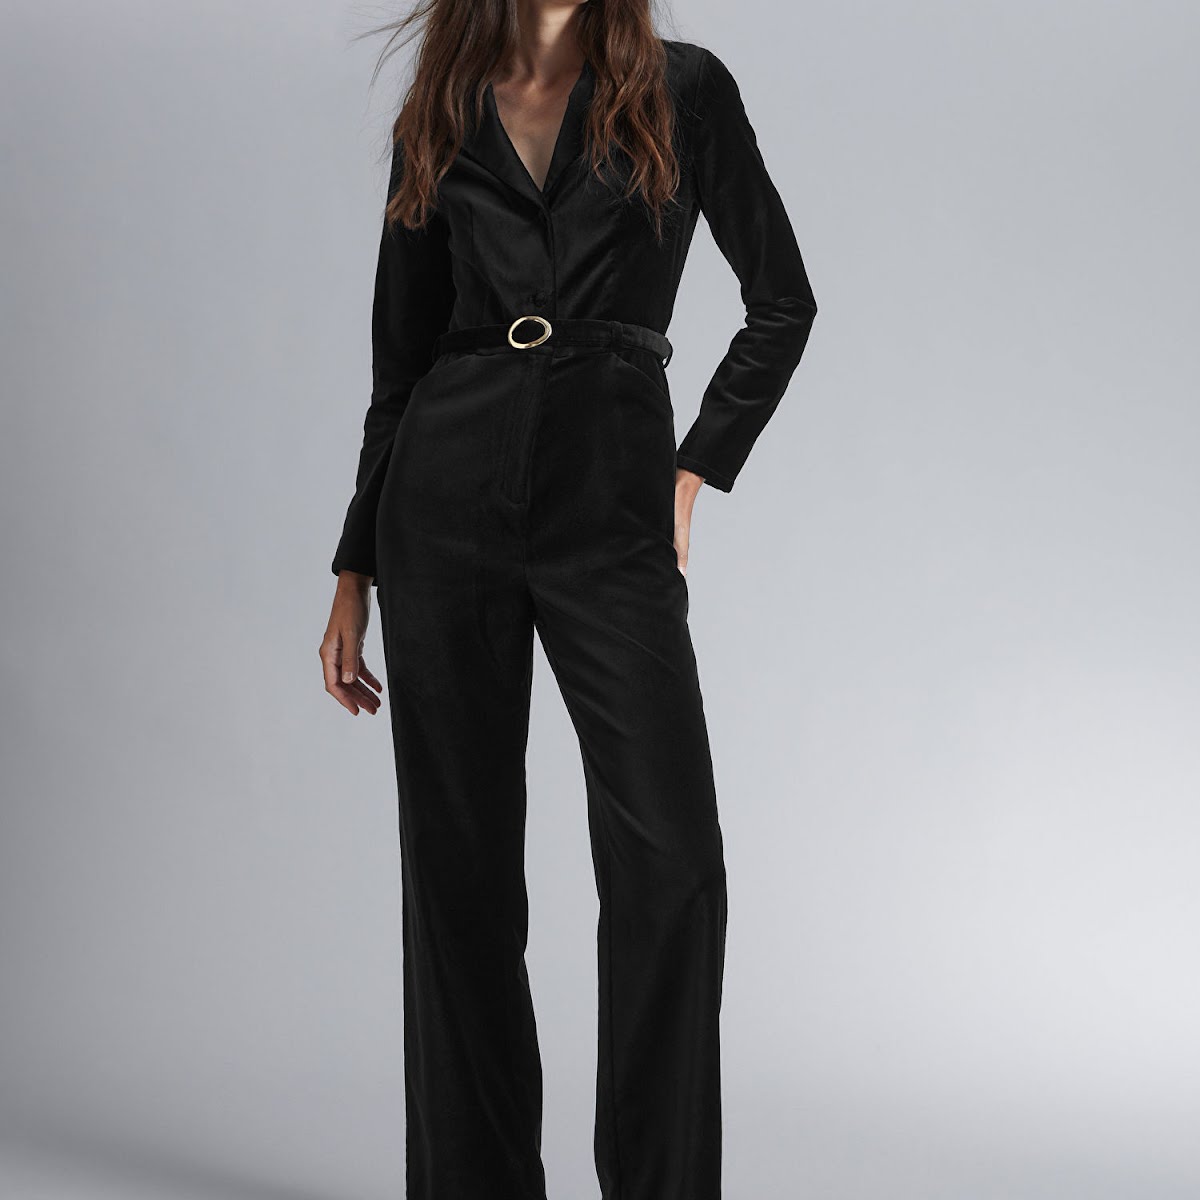 & Other Stories Belted Jumpsuit, €129